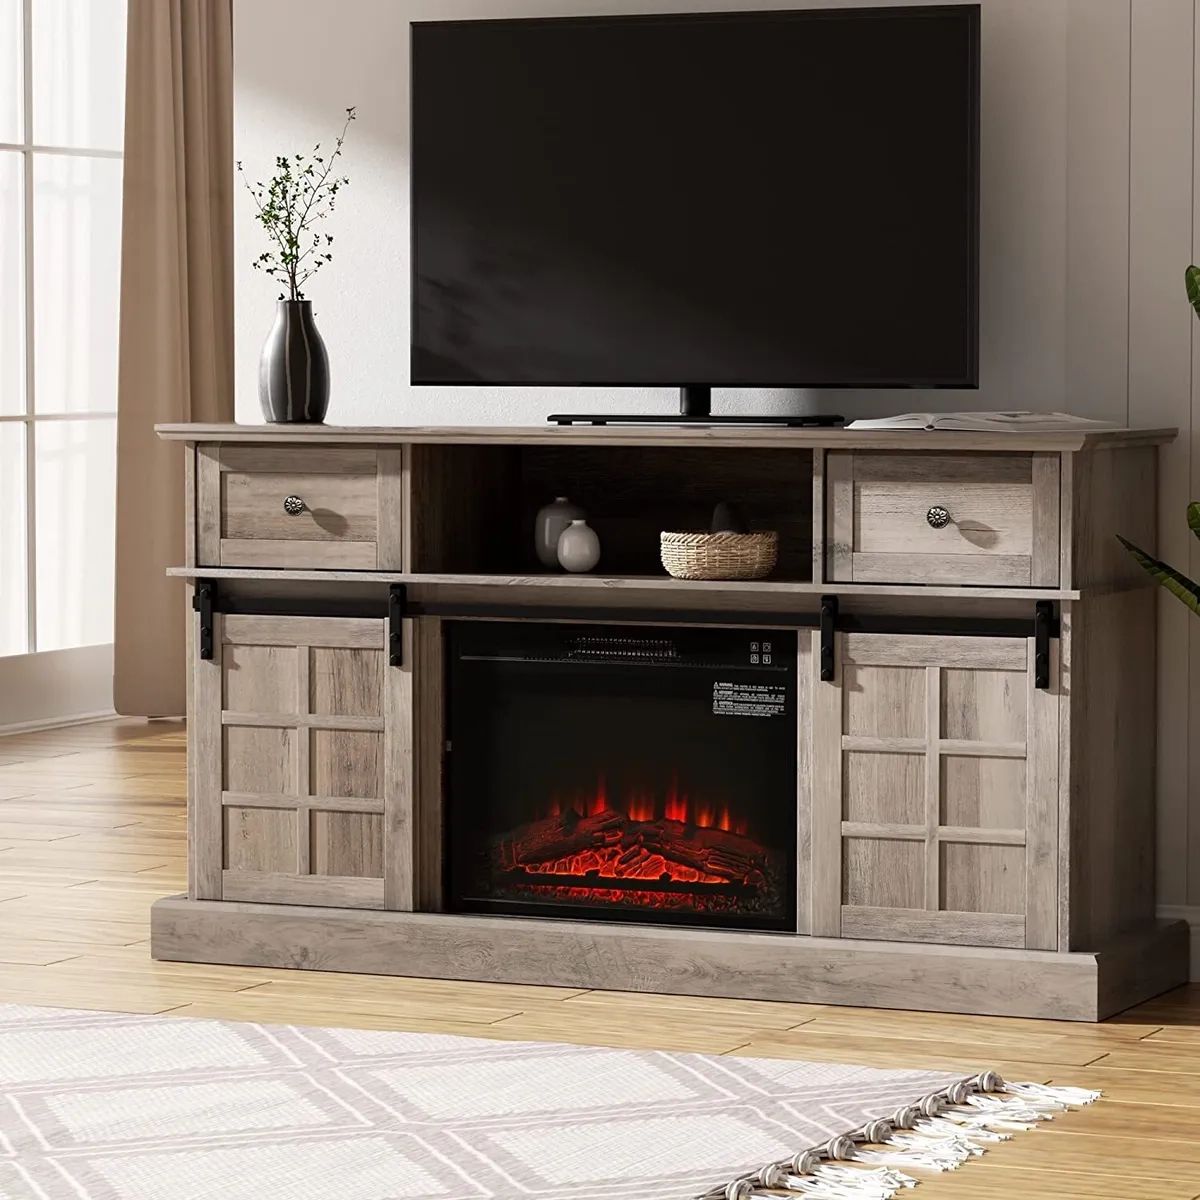 58" Farmhouse Tv Stand For Tvs Up To 65" Entertainment Center Media W/  Fireplace | Ebay Throughout Farmhouse Media Entertainment Centers (View 10 of 15)